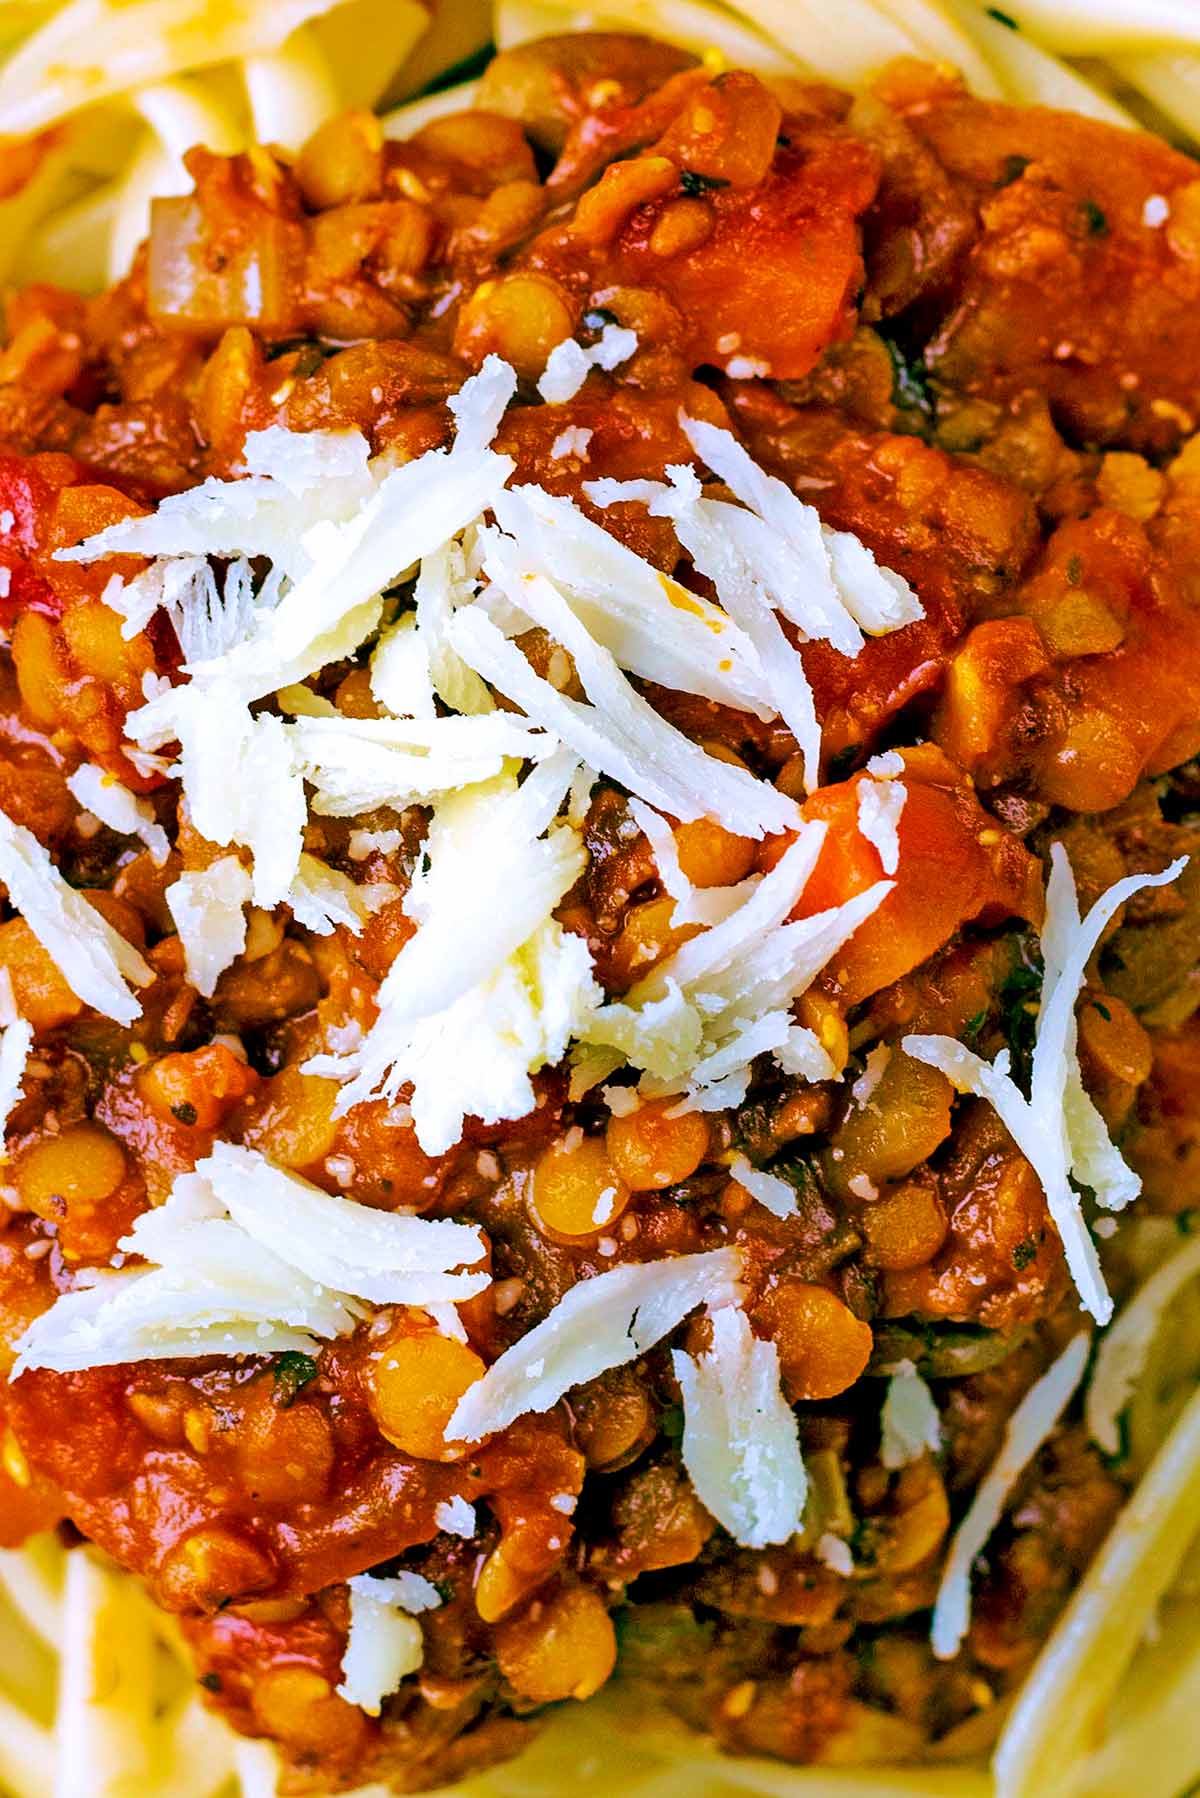 Lentil bolognese with some shavings of cheese.